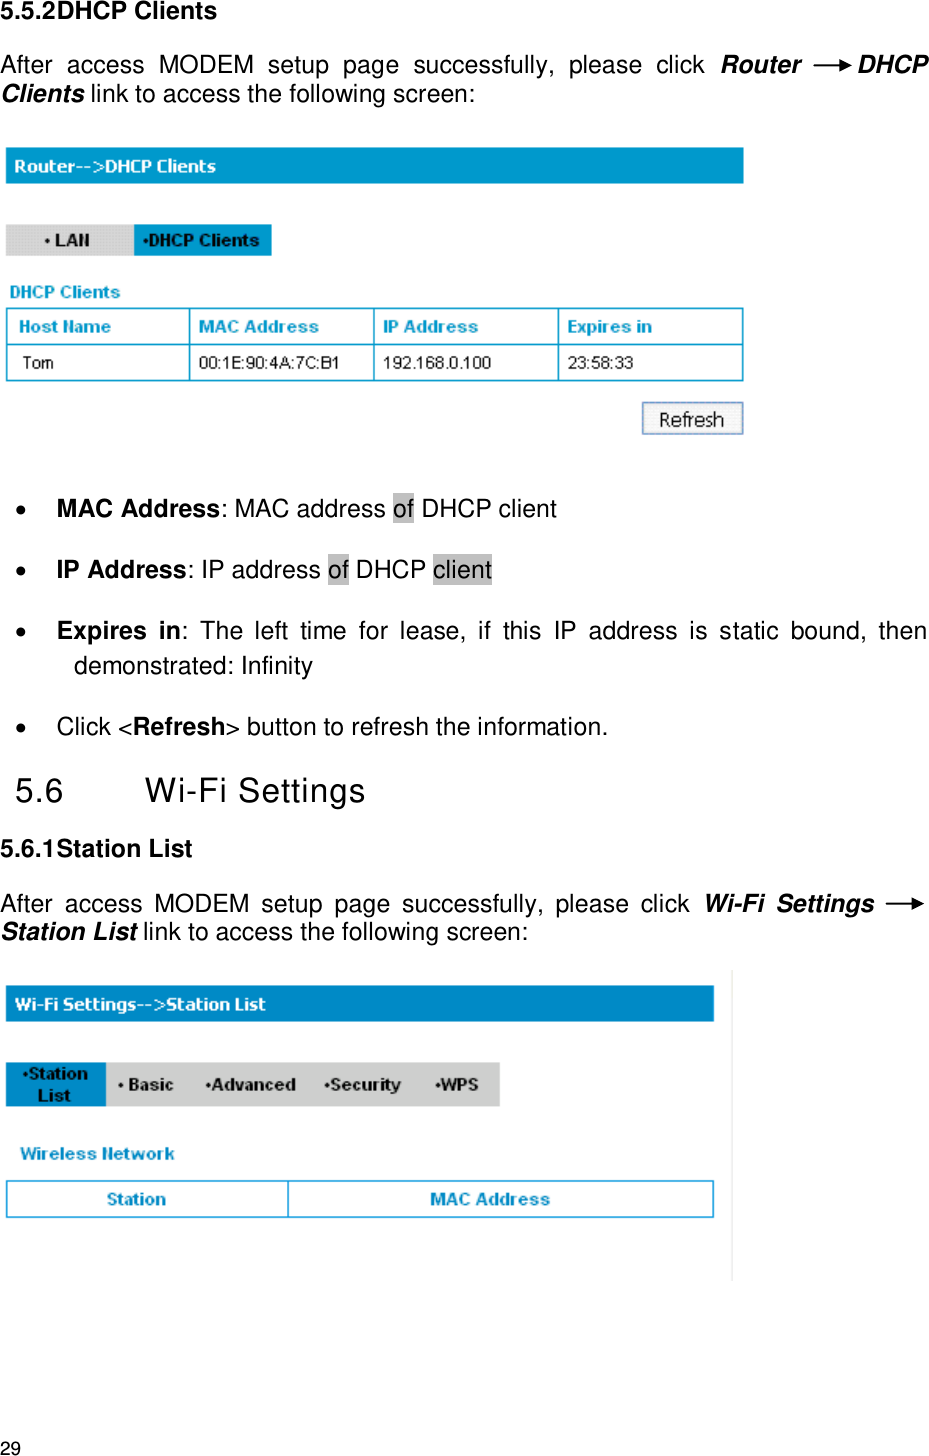 29 5.5.2 DHCP Clients After  access  MODEM  setup  page  successfully,  please  click  Router  DHCP Clients link to access the following screen:     MAC Address: MAC address of DHCP client  IP Address: IP address of DHCP client    Expires  in:  The  left  time  for  lease,  if  this  IP  address  is  static  bound,  then demonstrated: Infinity   Click &lt;Refresh&gt; button to refresh the information. 5.6  Wi-Fi Settings     5.6.1 Station List After  access  MODEM  setup  page  successfully,  please  click  Wi-Fi  Settings Station List link to access the following screen:  